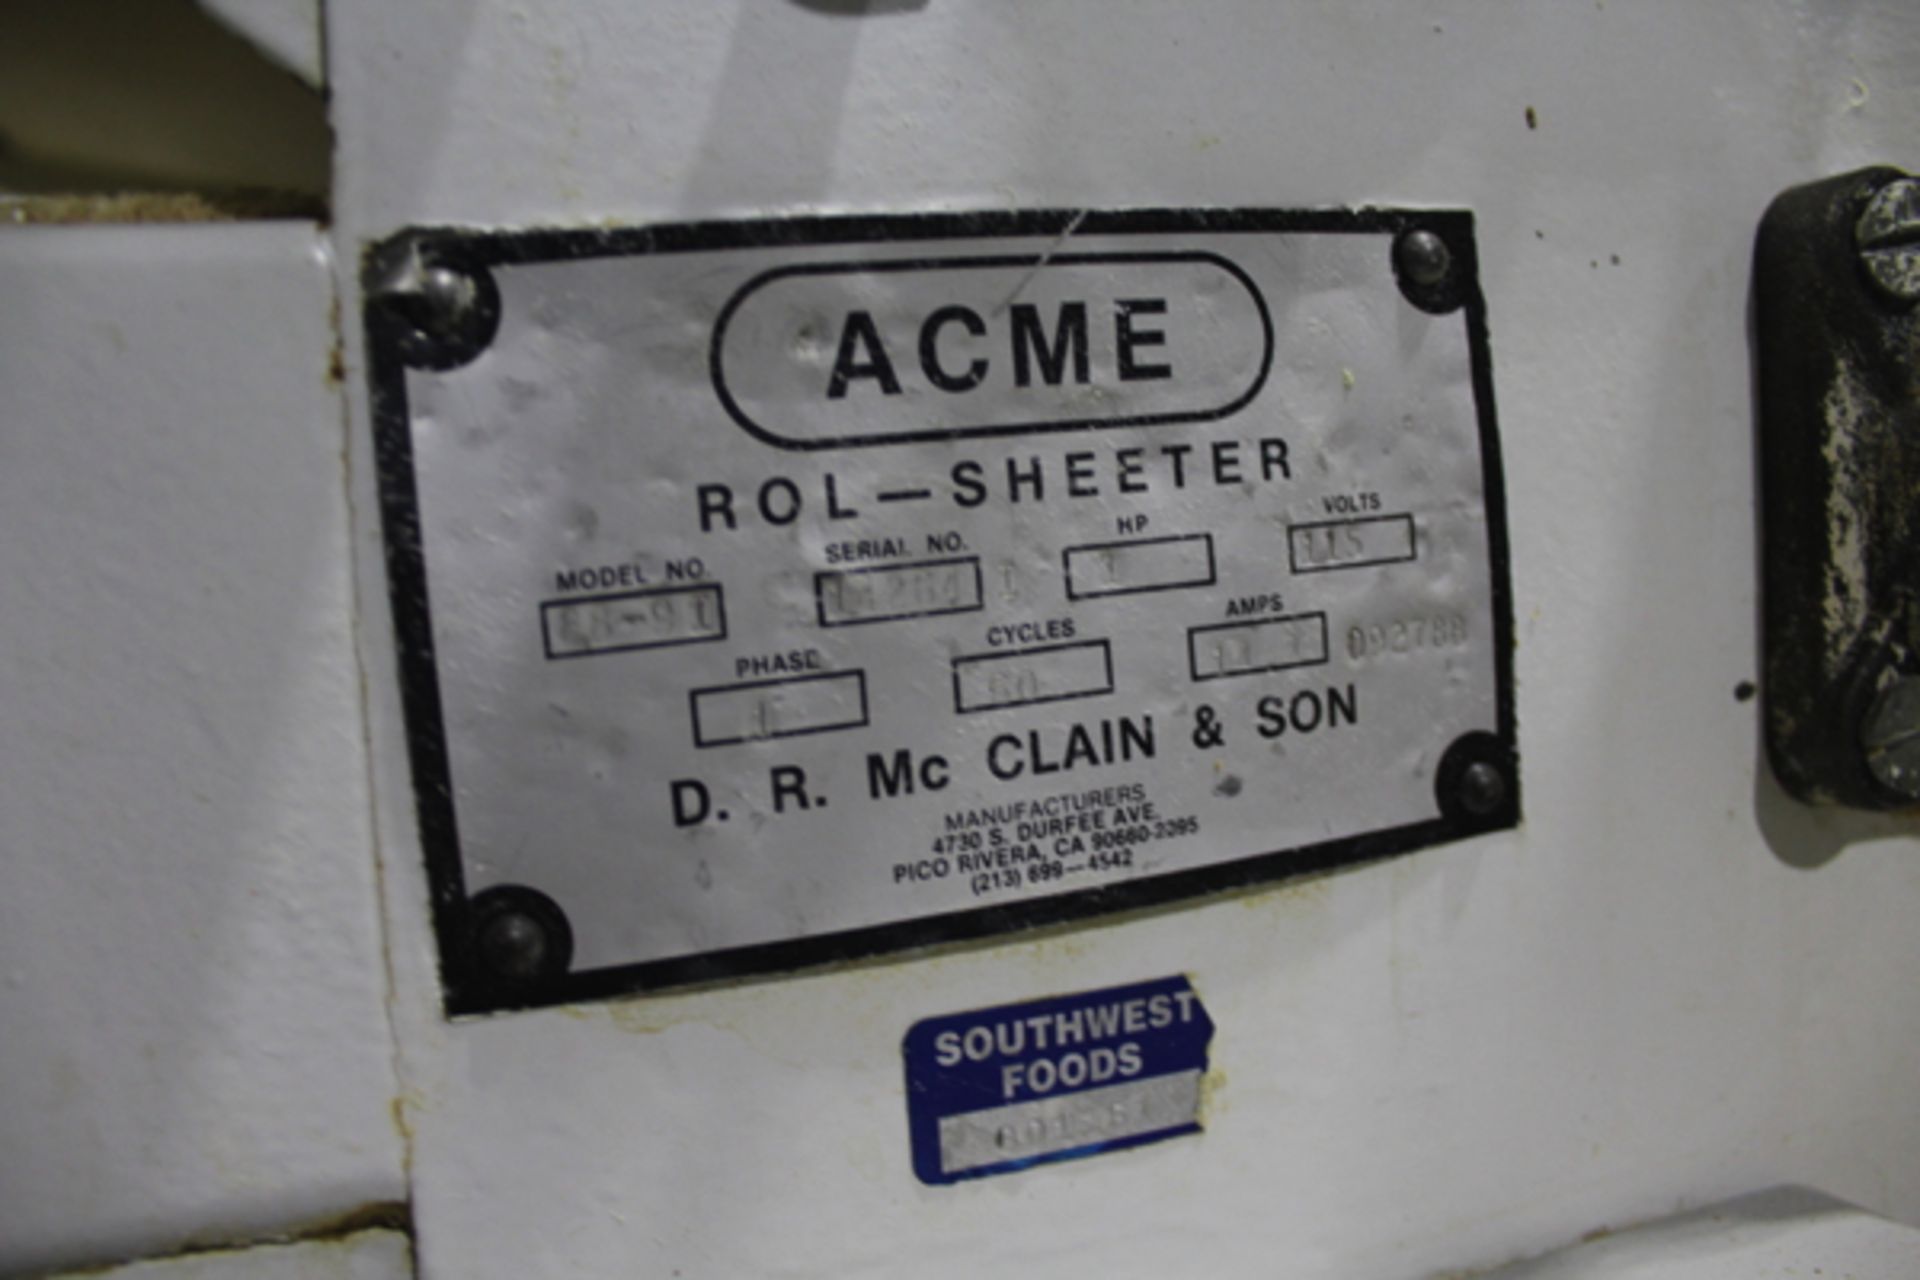 Acme Roll Sheeter, M# 88-9I, S/N 14264, 23" X 125" | Loading Price: $250 - Image 2 of 3